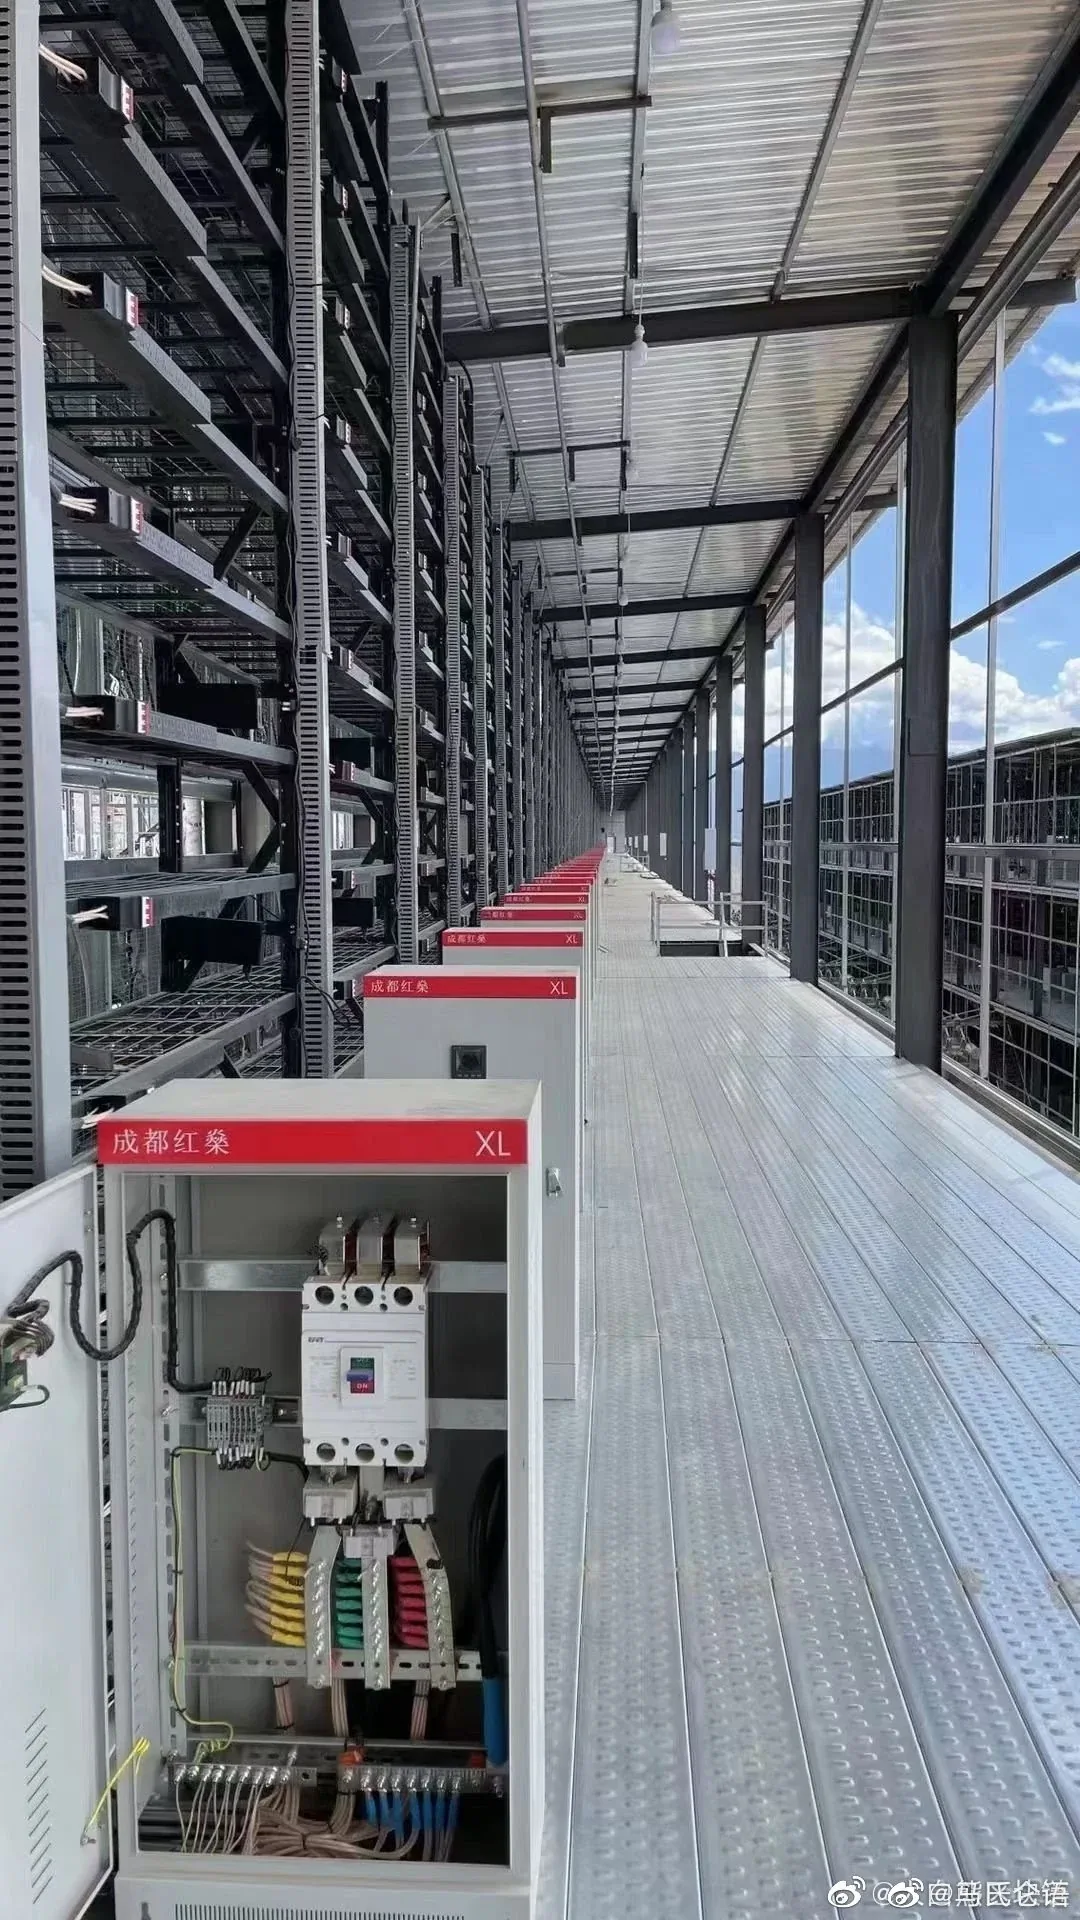 A metal platform with empty Bitcoin mining racks on the left.